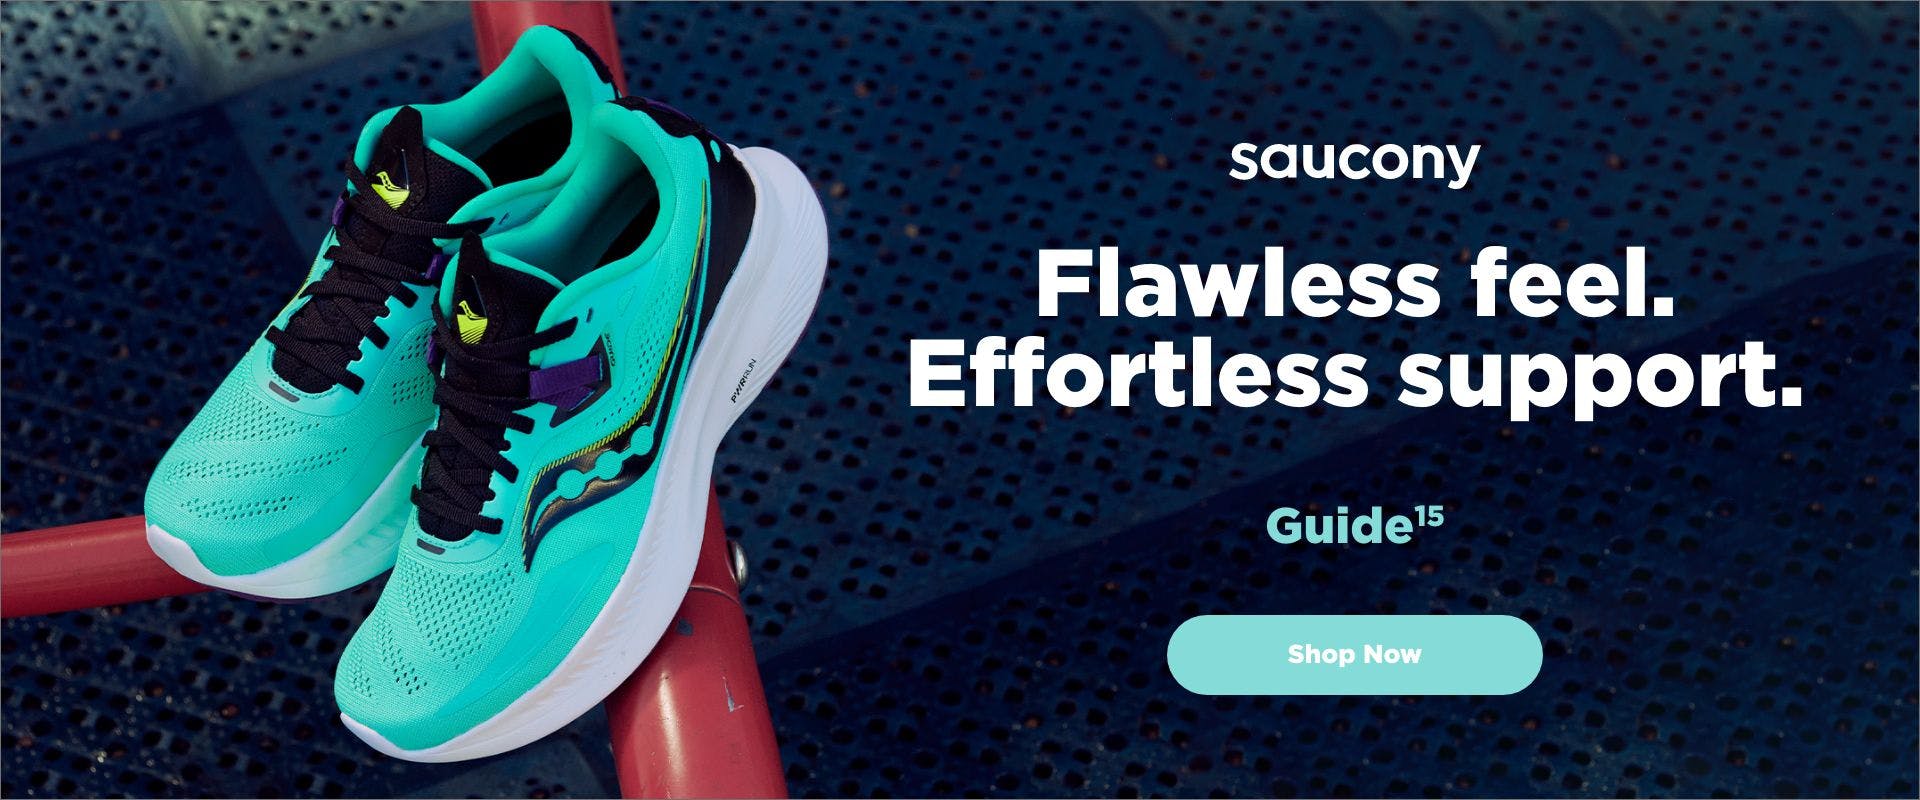 Saucony Running Shoes & Running Clothes | SportsShoes.com | SportsShoes.com